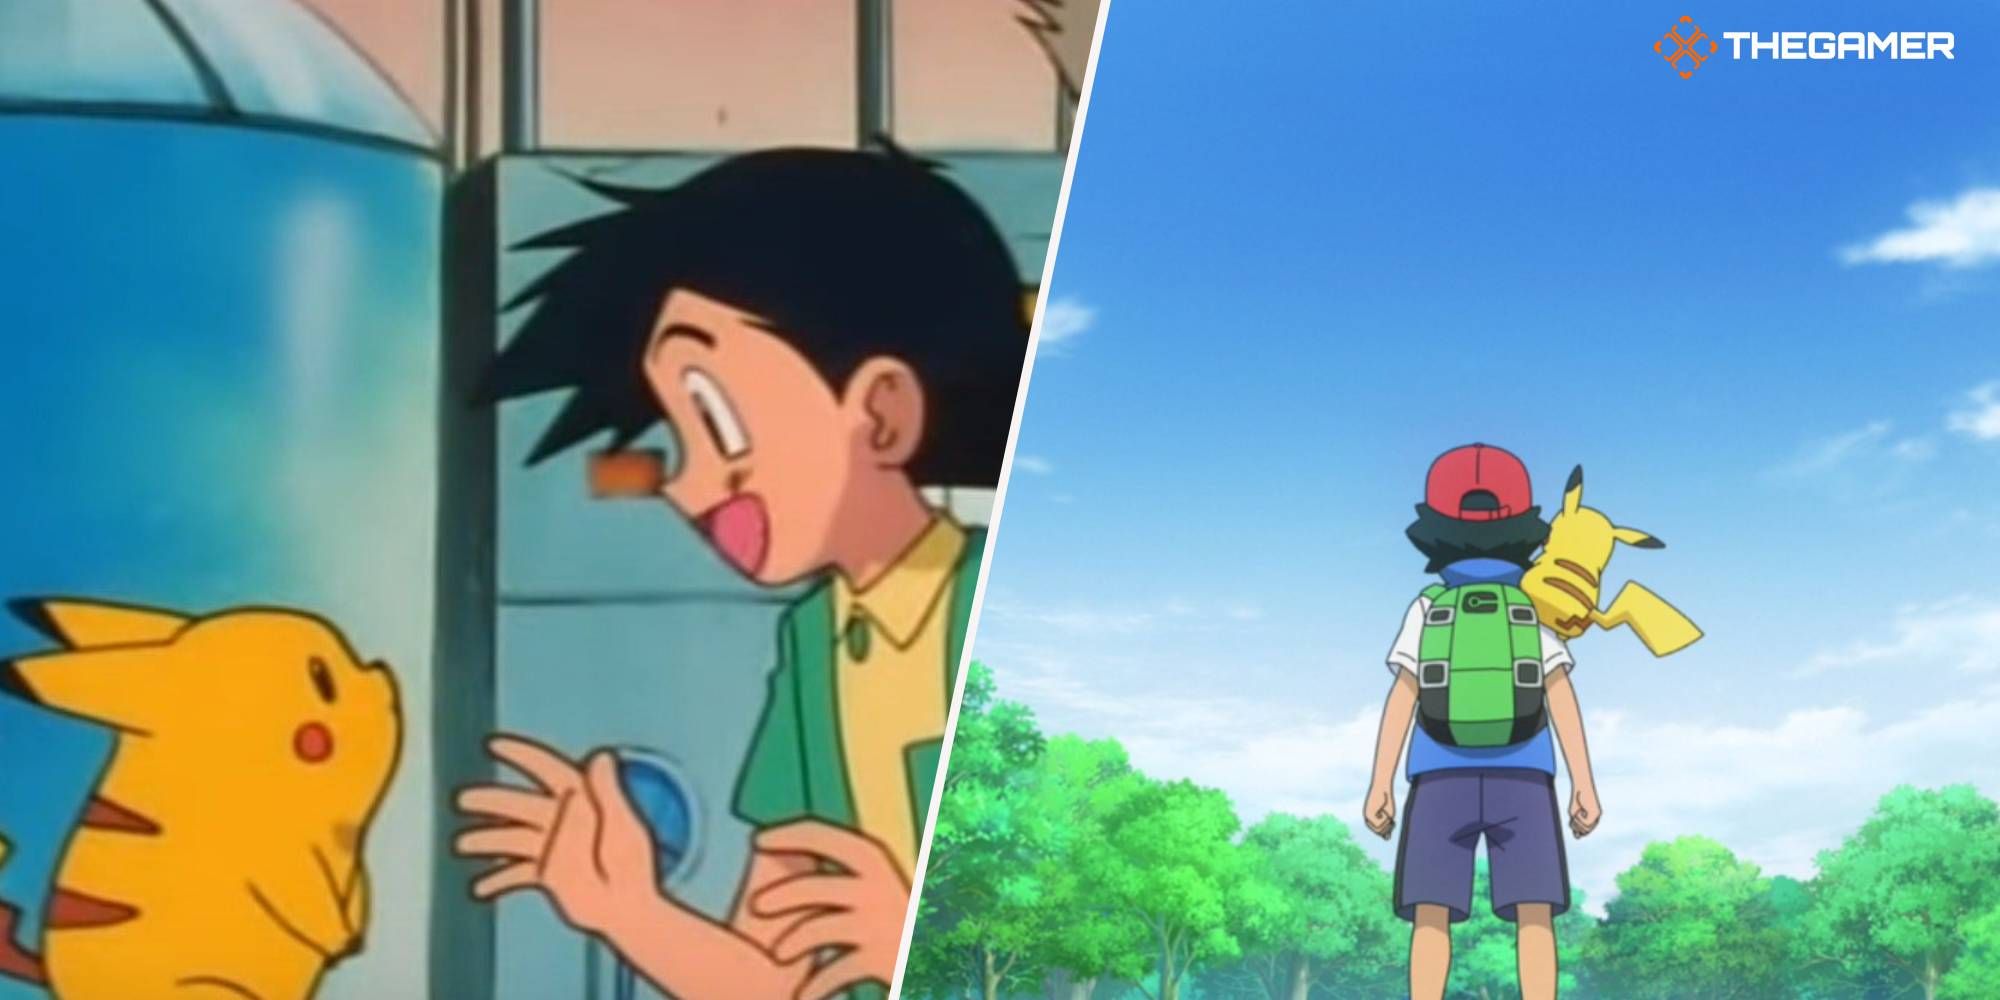 Ash Ketchum and Pikachu as seen in the first and last episodes of the Pokemon anime